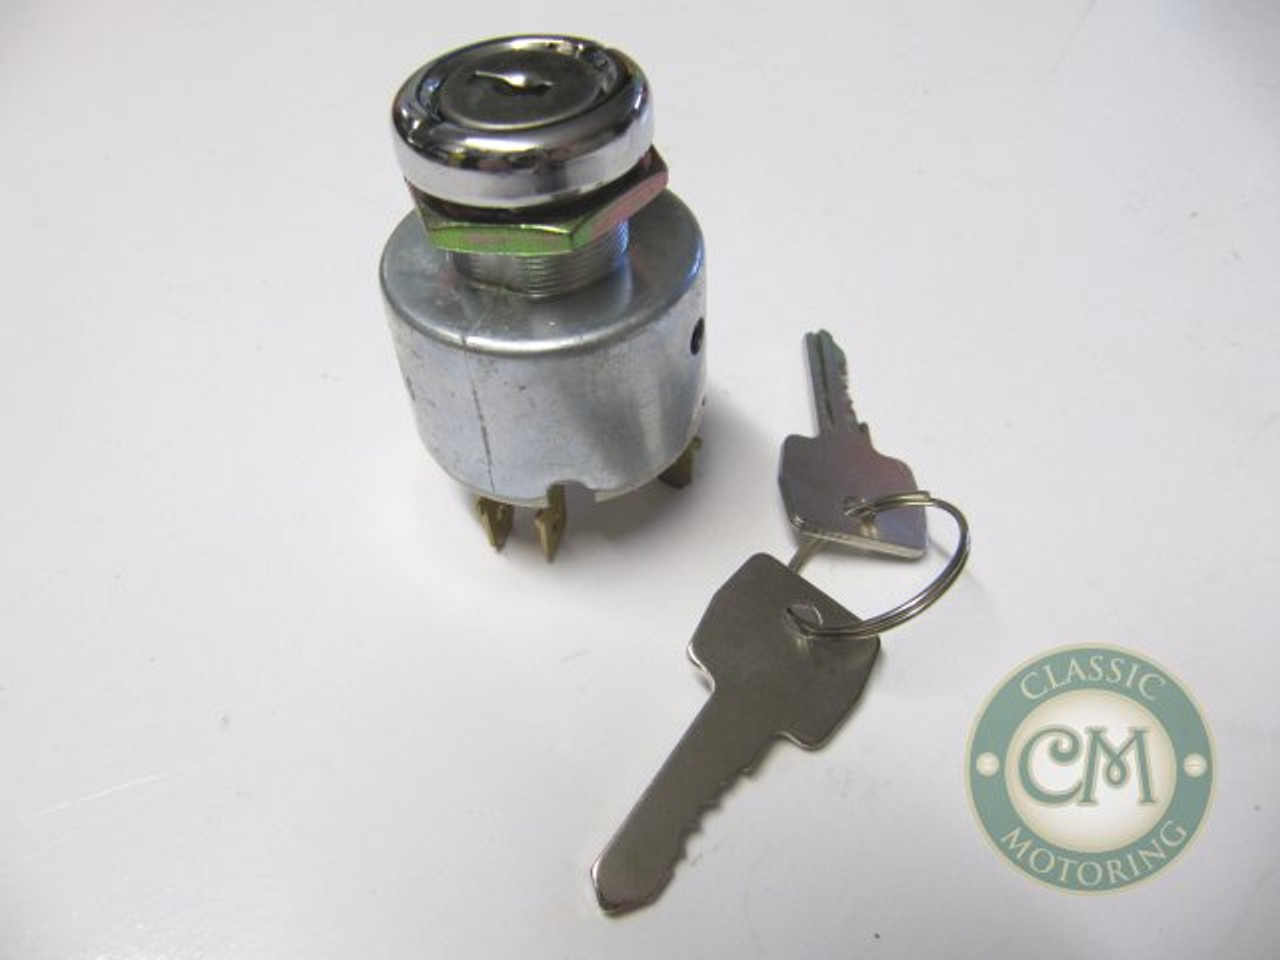 R551508 - Ignition Switch - Centre Ignition Key-Start